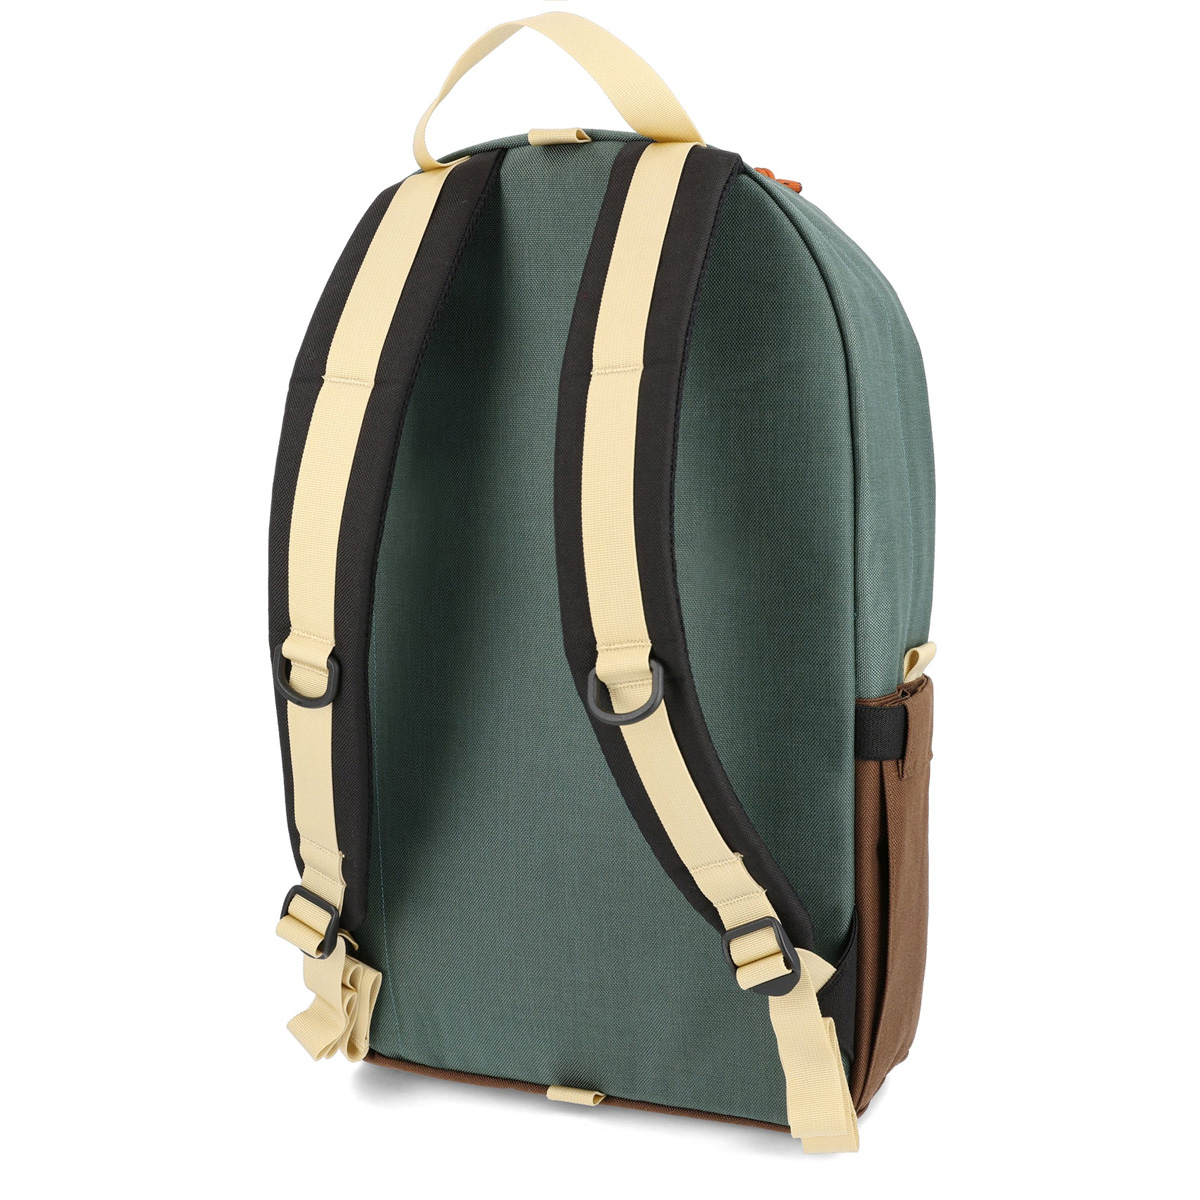 Topo Designs Daypack Classic Forest/Cocoa, stylish and functional pack, ideal travel companion, schoolmate or pack mule